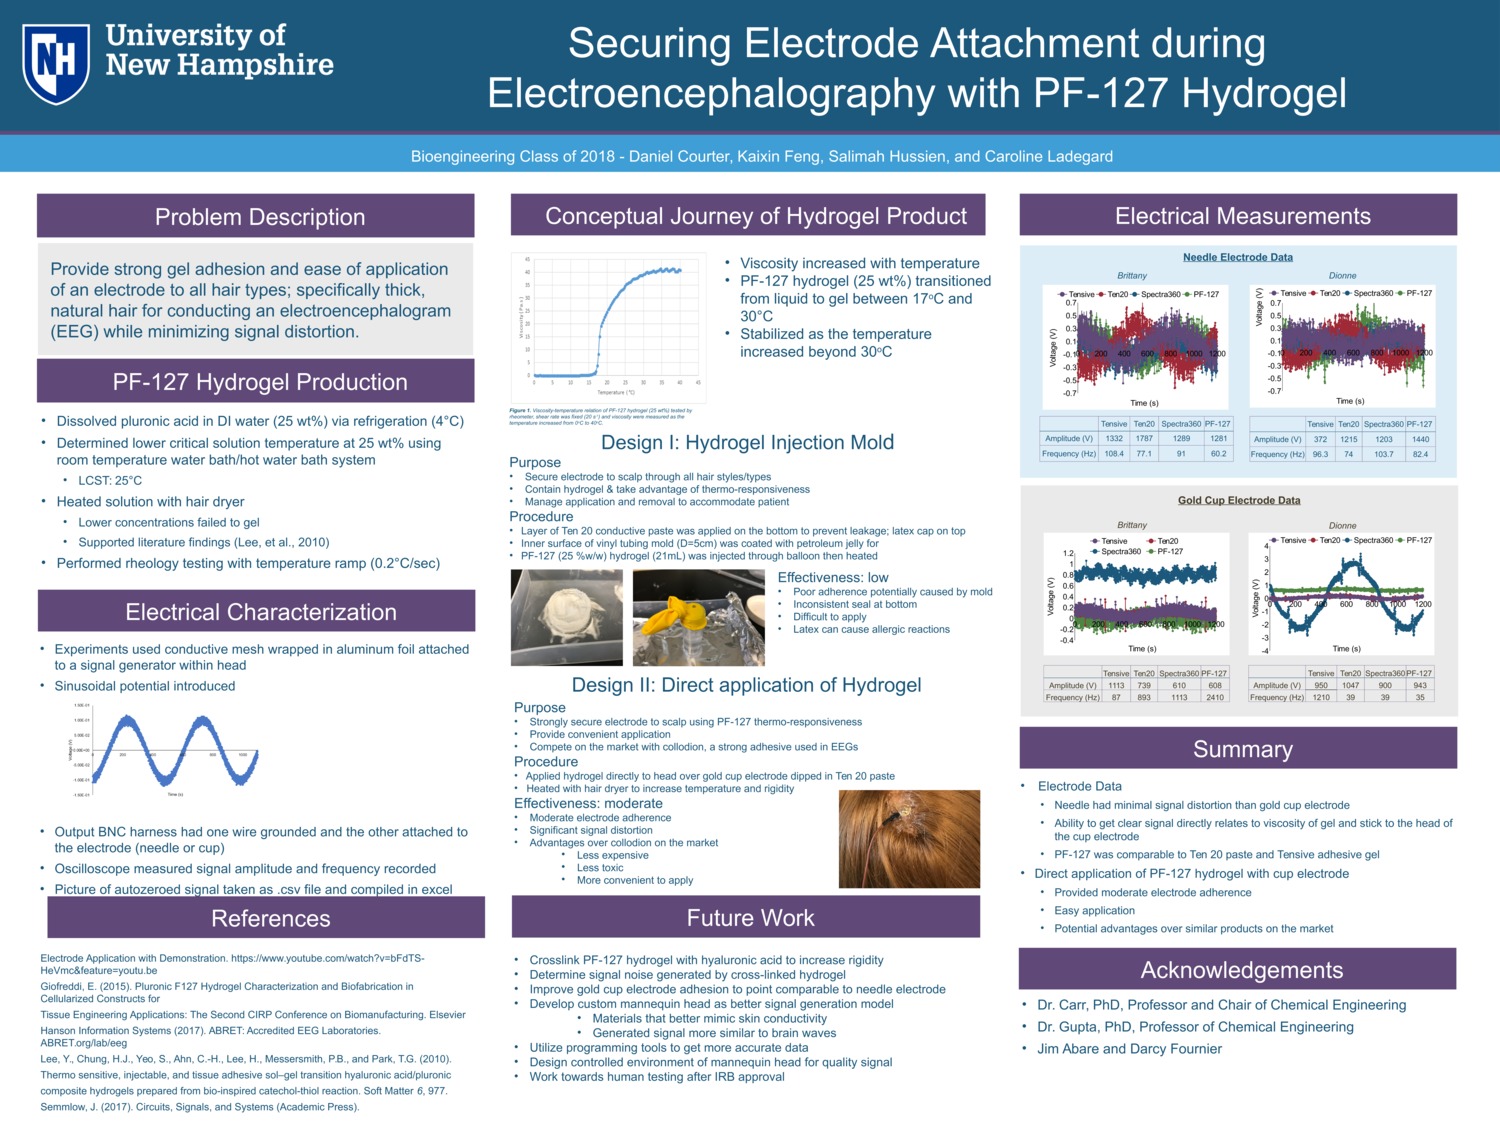 Securing Electrode Attachment During Electroencephalography With Pf-127 Hydrogel by kf2000